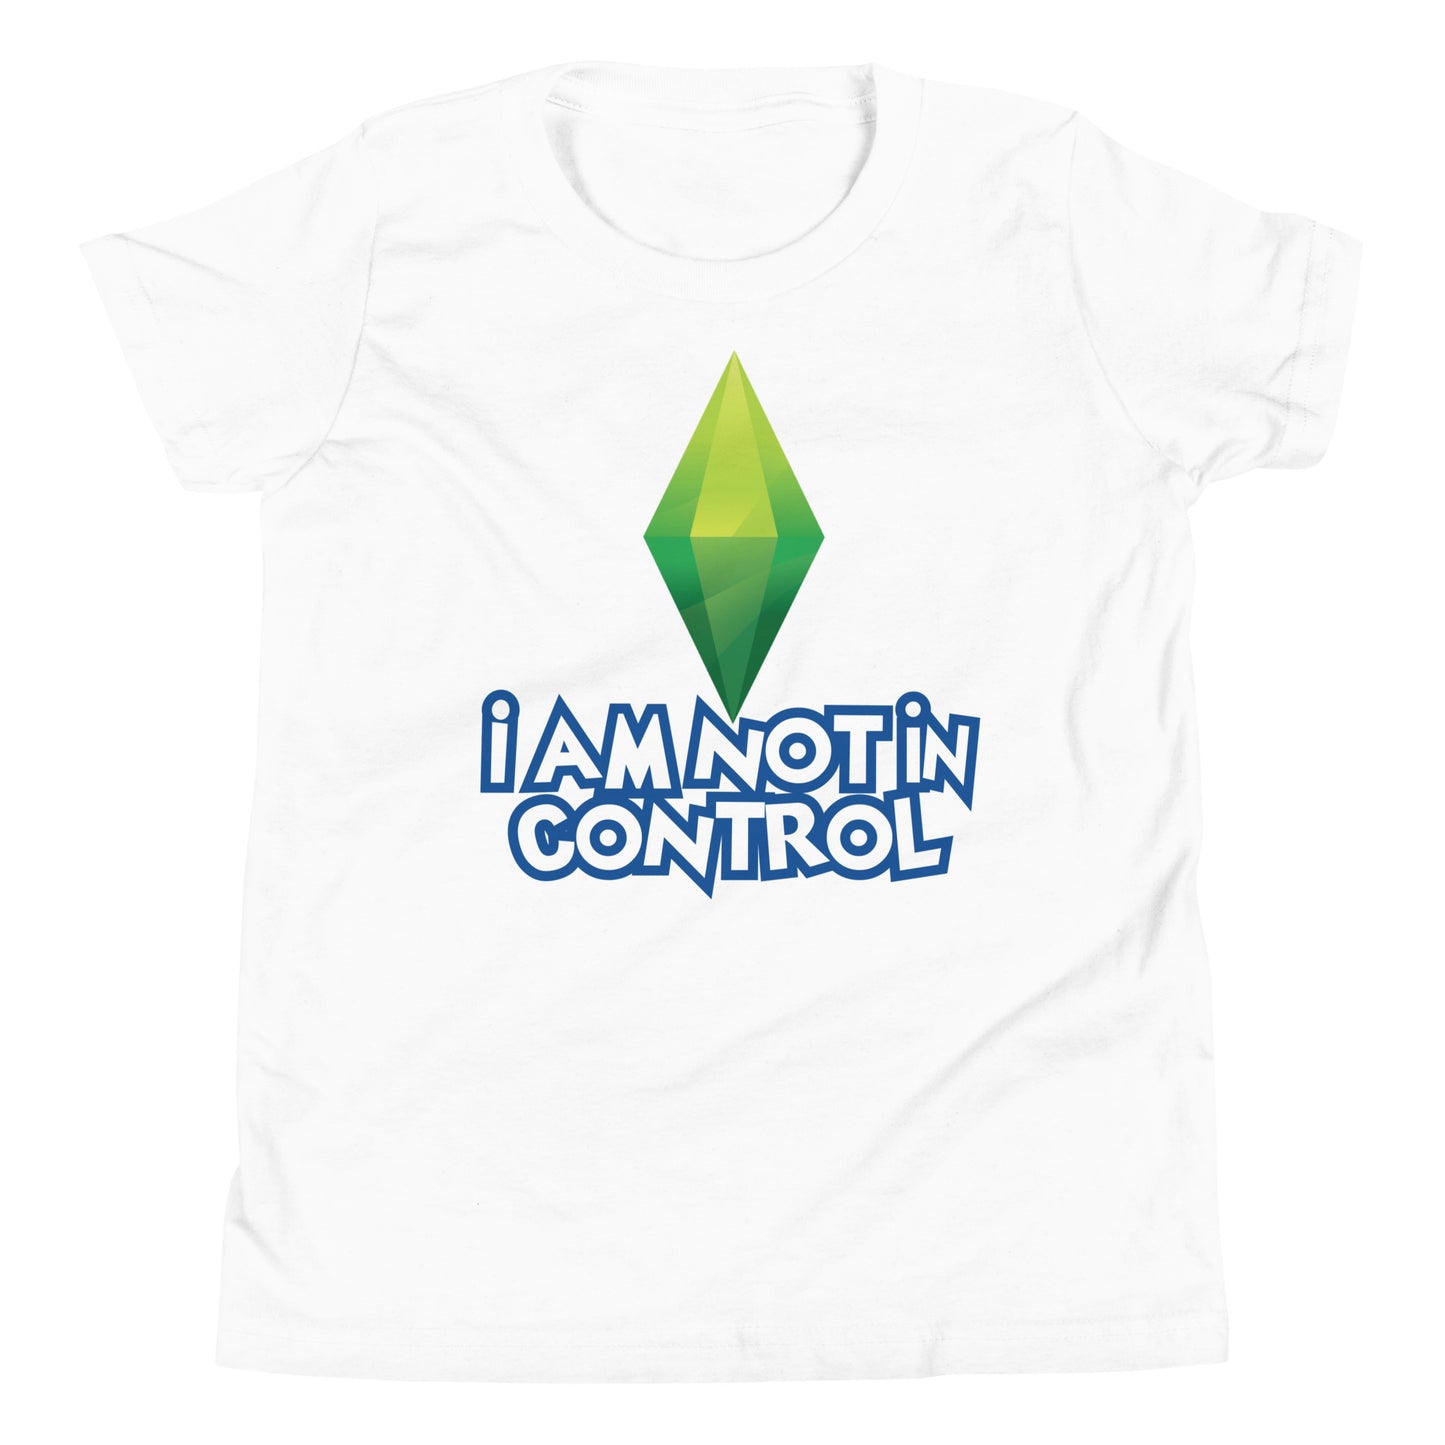 Youth I Am Not in Control T-Shirt